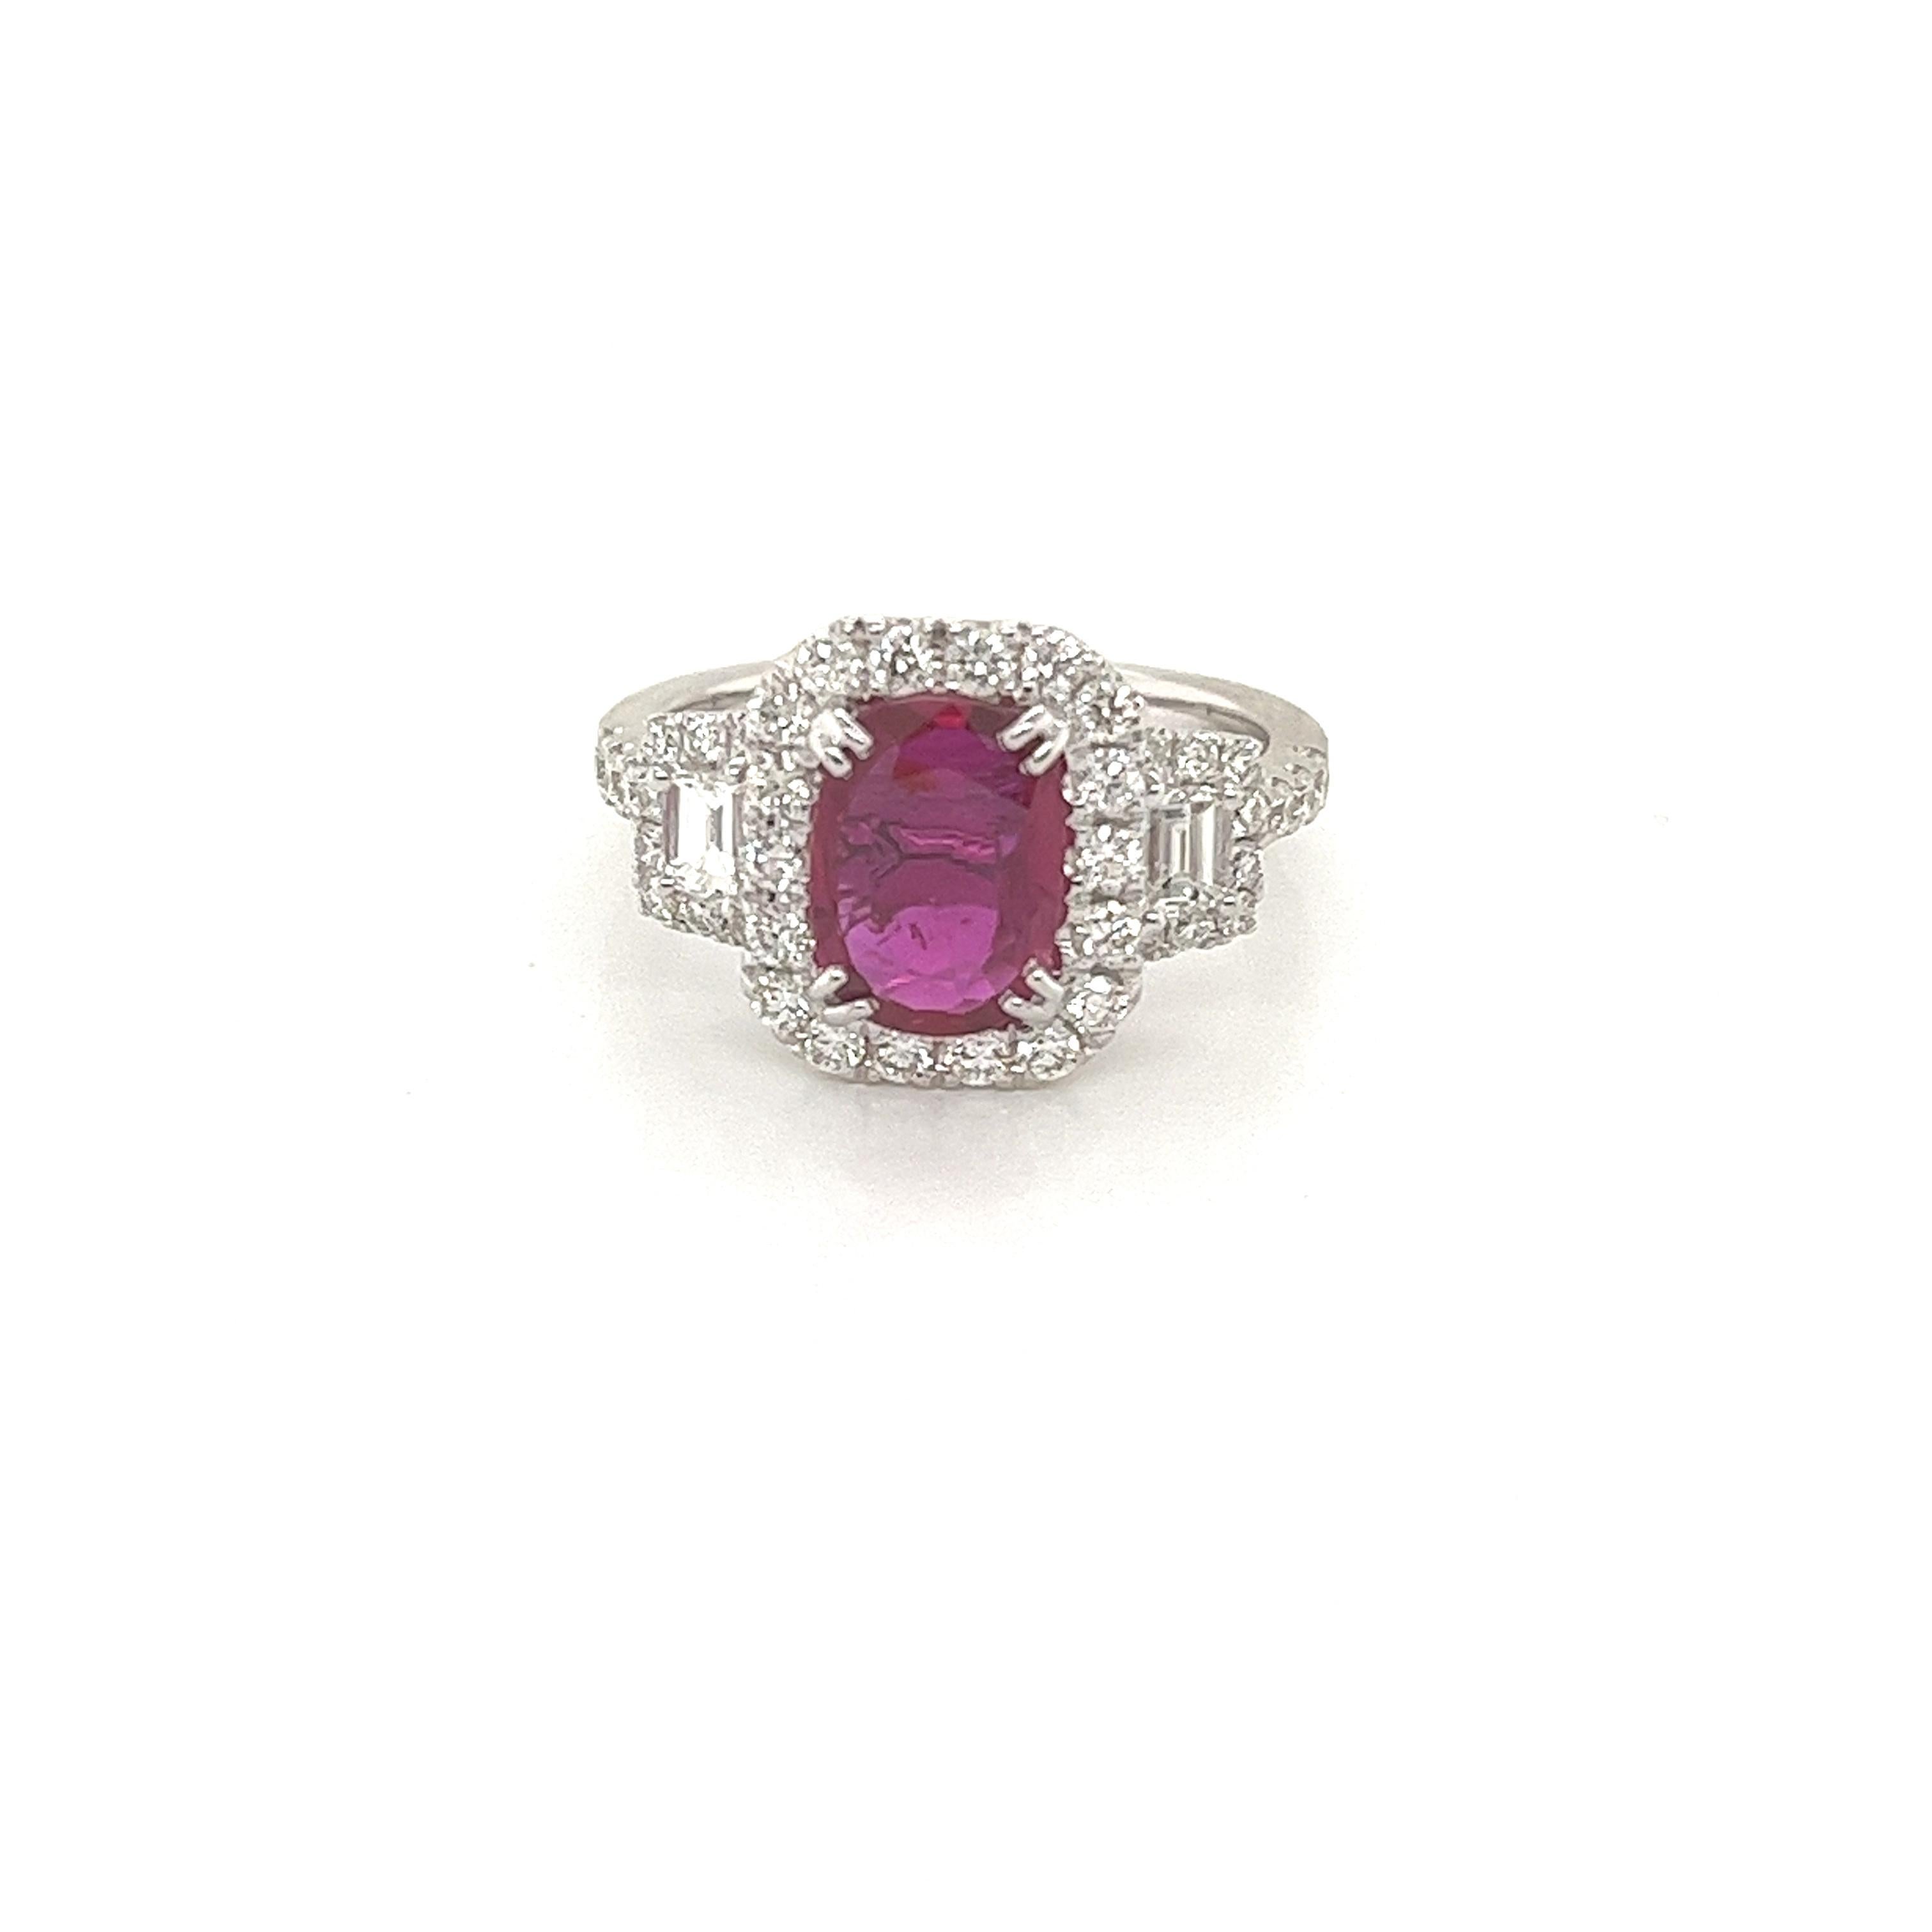 GIA certified unheated ruby weighing 1.51 cts
Measuring (9.01x6.62x2.43) mm
Two baguette diamonds weighing .21 cts
42 round diamonds weighing .63 cts
Set in 18 karat white gold ring
4.28 grams